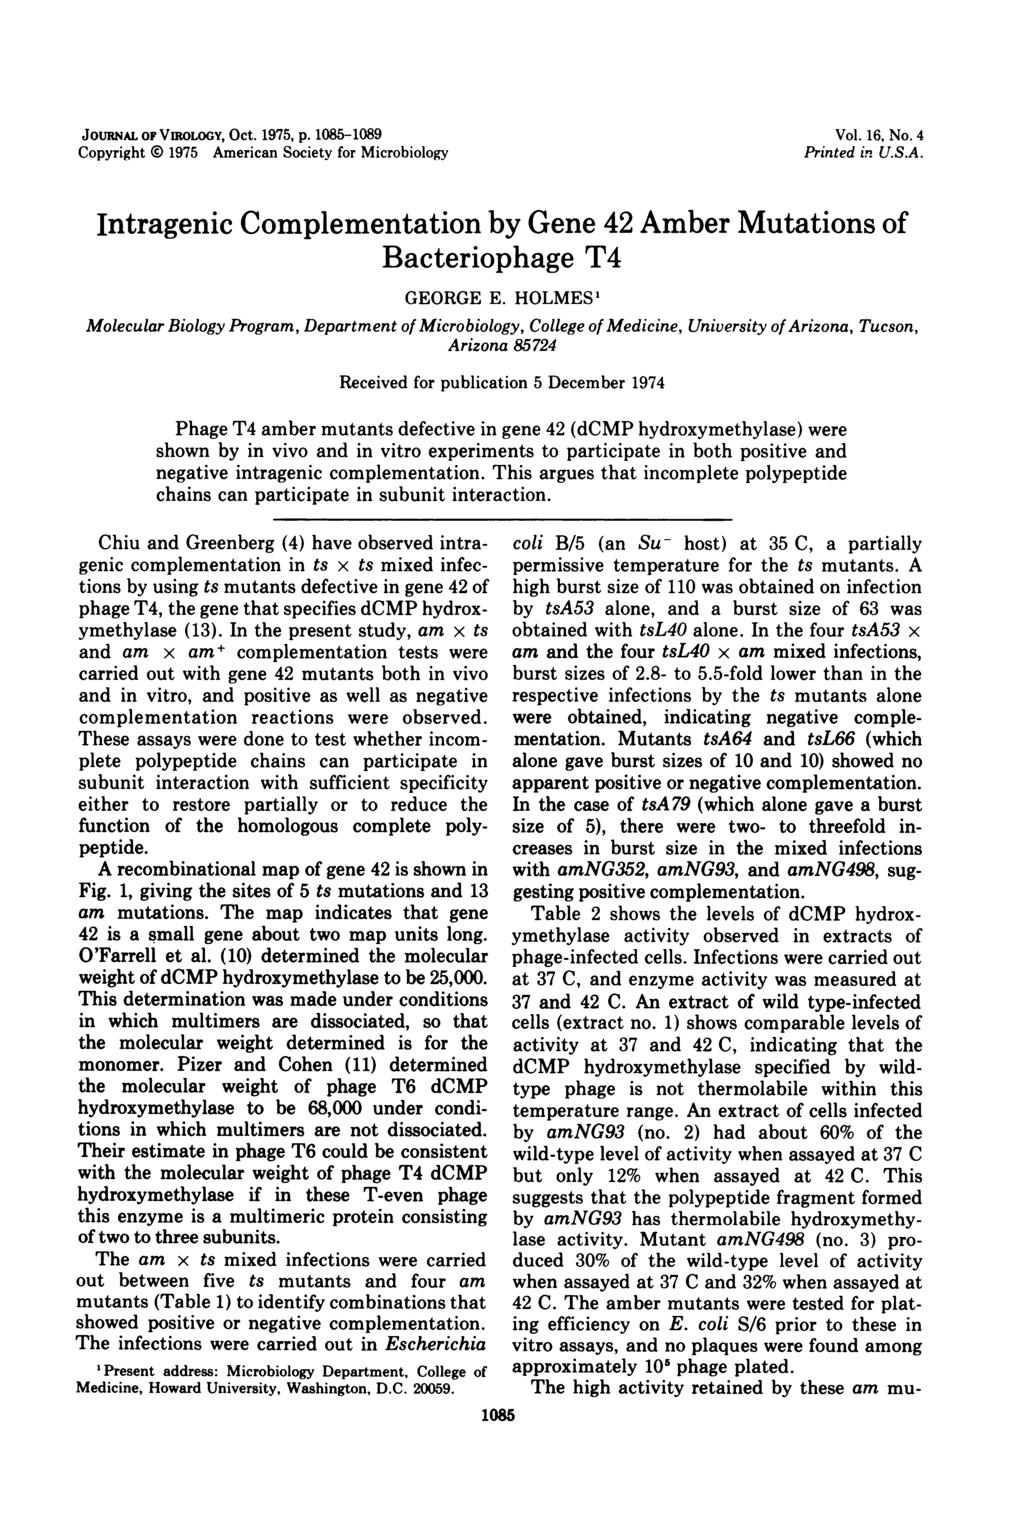 JOURNAL OF VIROLOGY, Oct. 1975, p. 1085-1089 Copyright 0 1975 American Society for Microbiology Vol. 16, No. 4 Printed i,n US.A. Intragenic Complementation by Gene 42 Amber Mutations of Bacteriophage T4 GEORGE E.